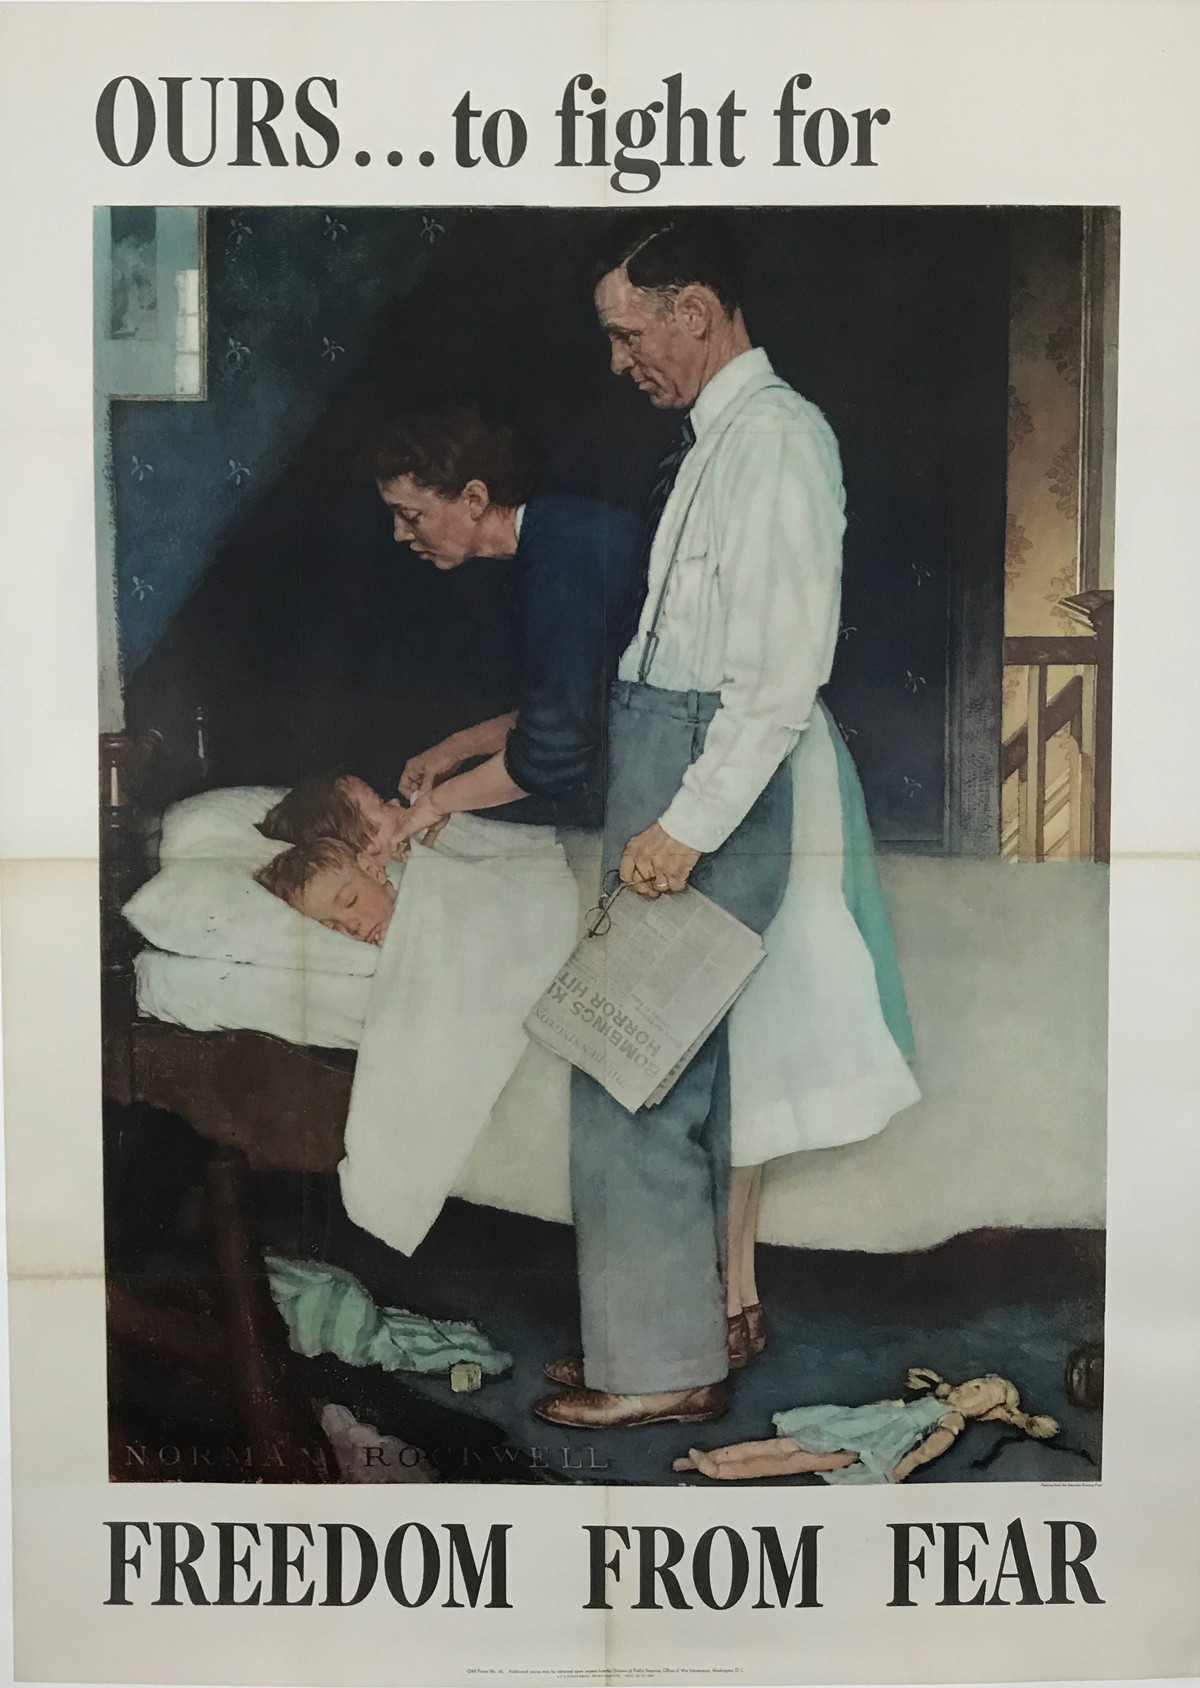 Freedom from Fear by Norman Rockwell Original 1942 Vintage American Propaganda Poster Linen Backed. Shows  two kids in bed and parents standing over them.